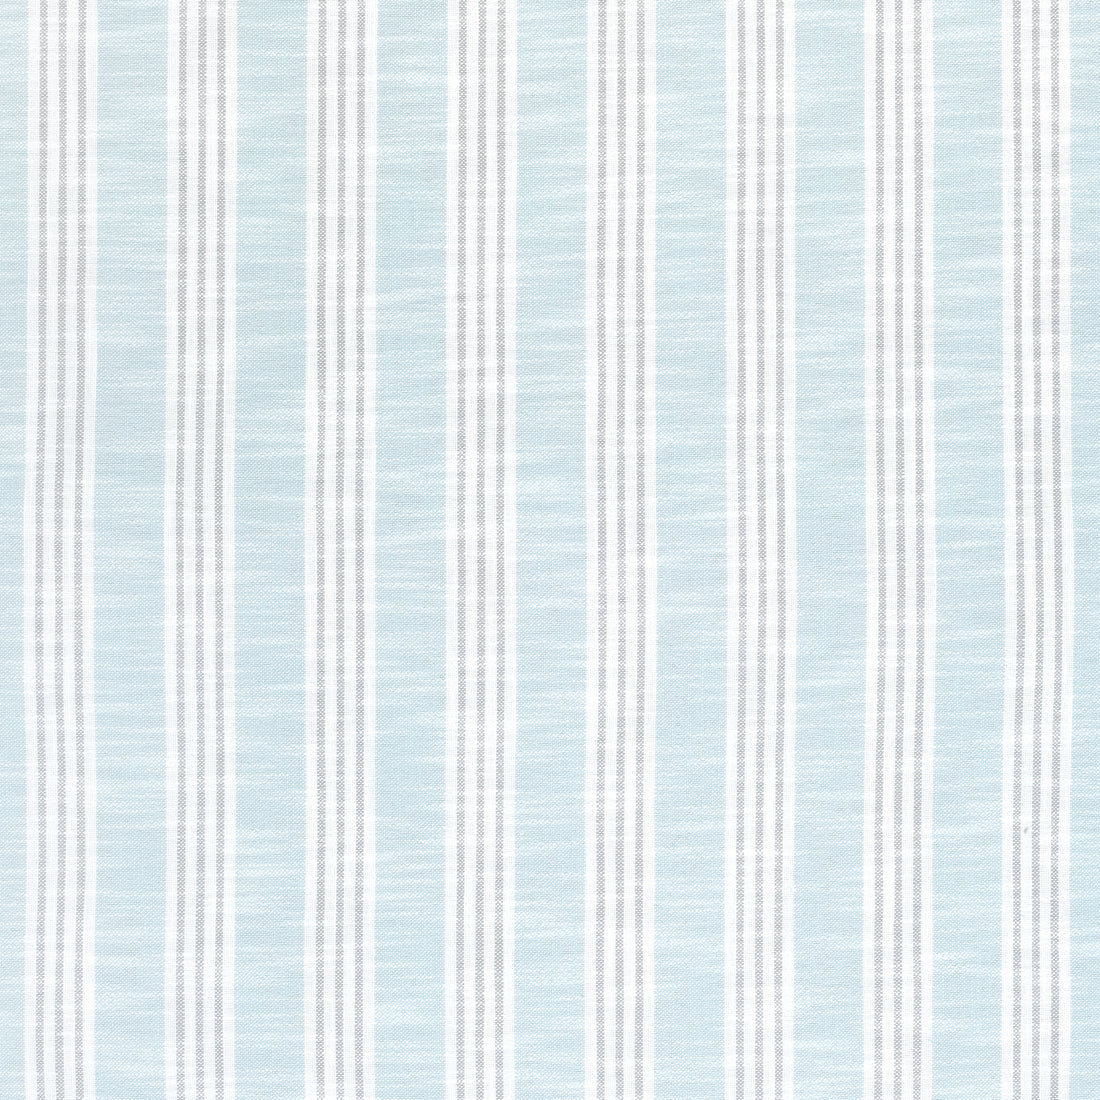 Southport Stripe fabric in seafoam and grey color - pattern number W73483 - by Thibaut in the Landmark collection